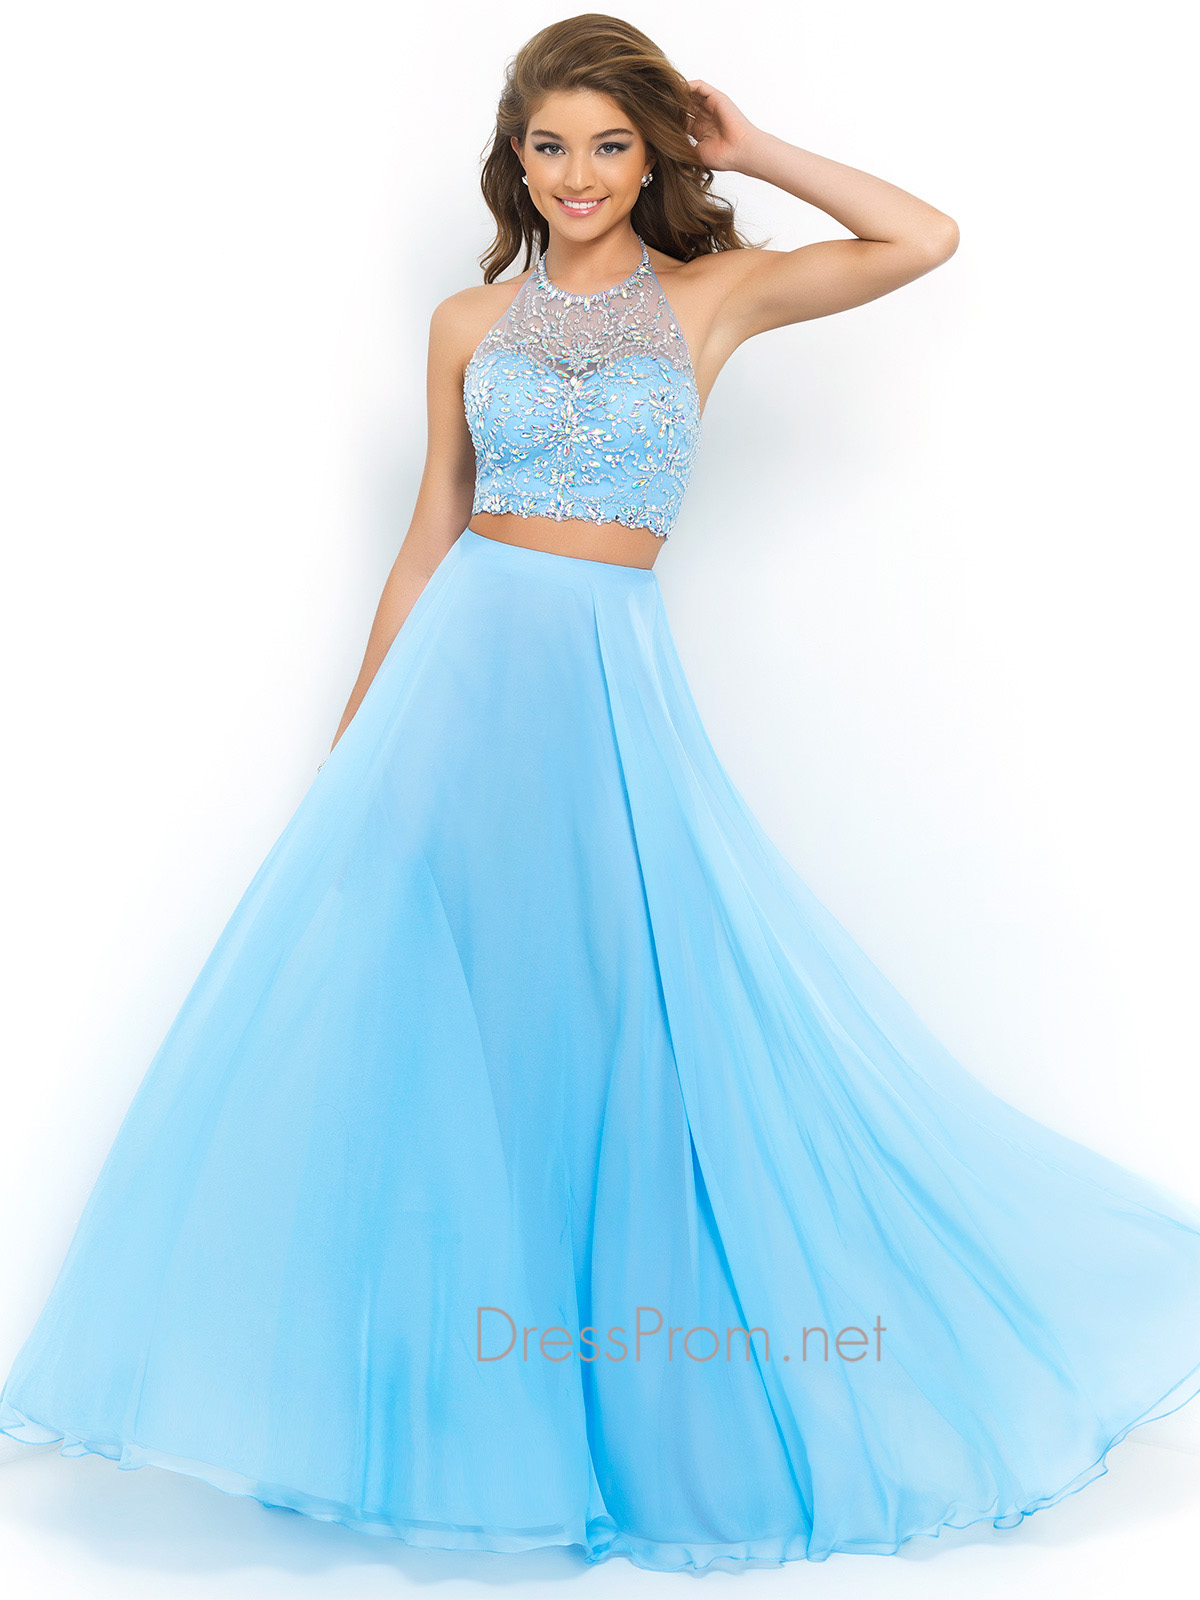 Two Piece Formal Evening Dresses & Oscar Fashion Review